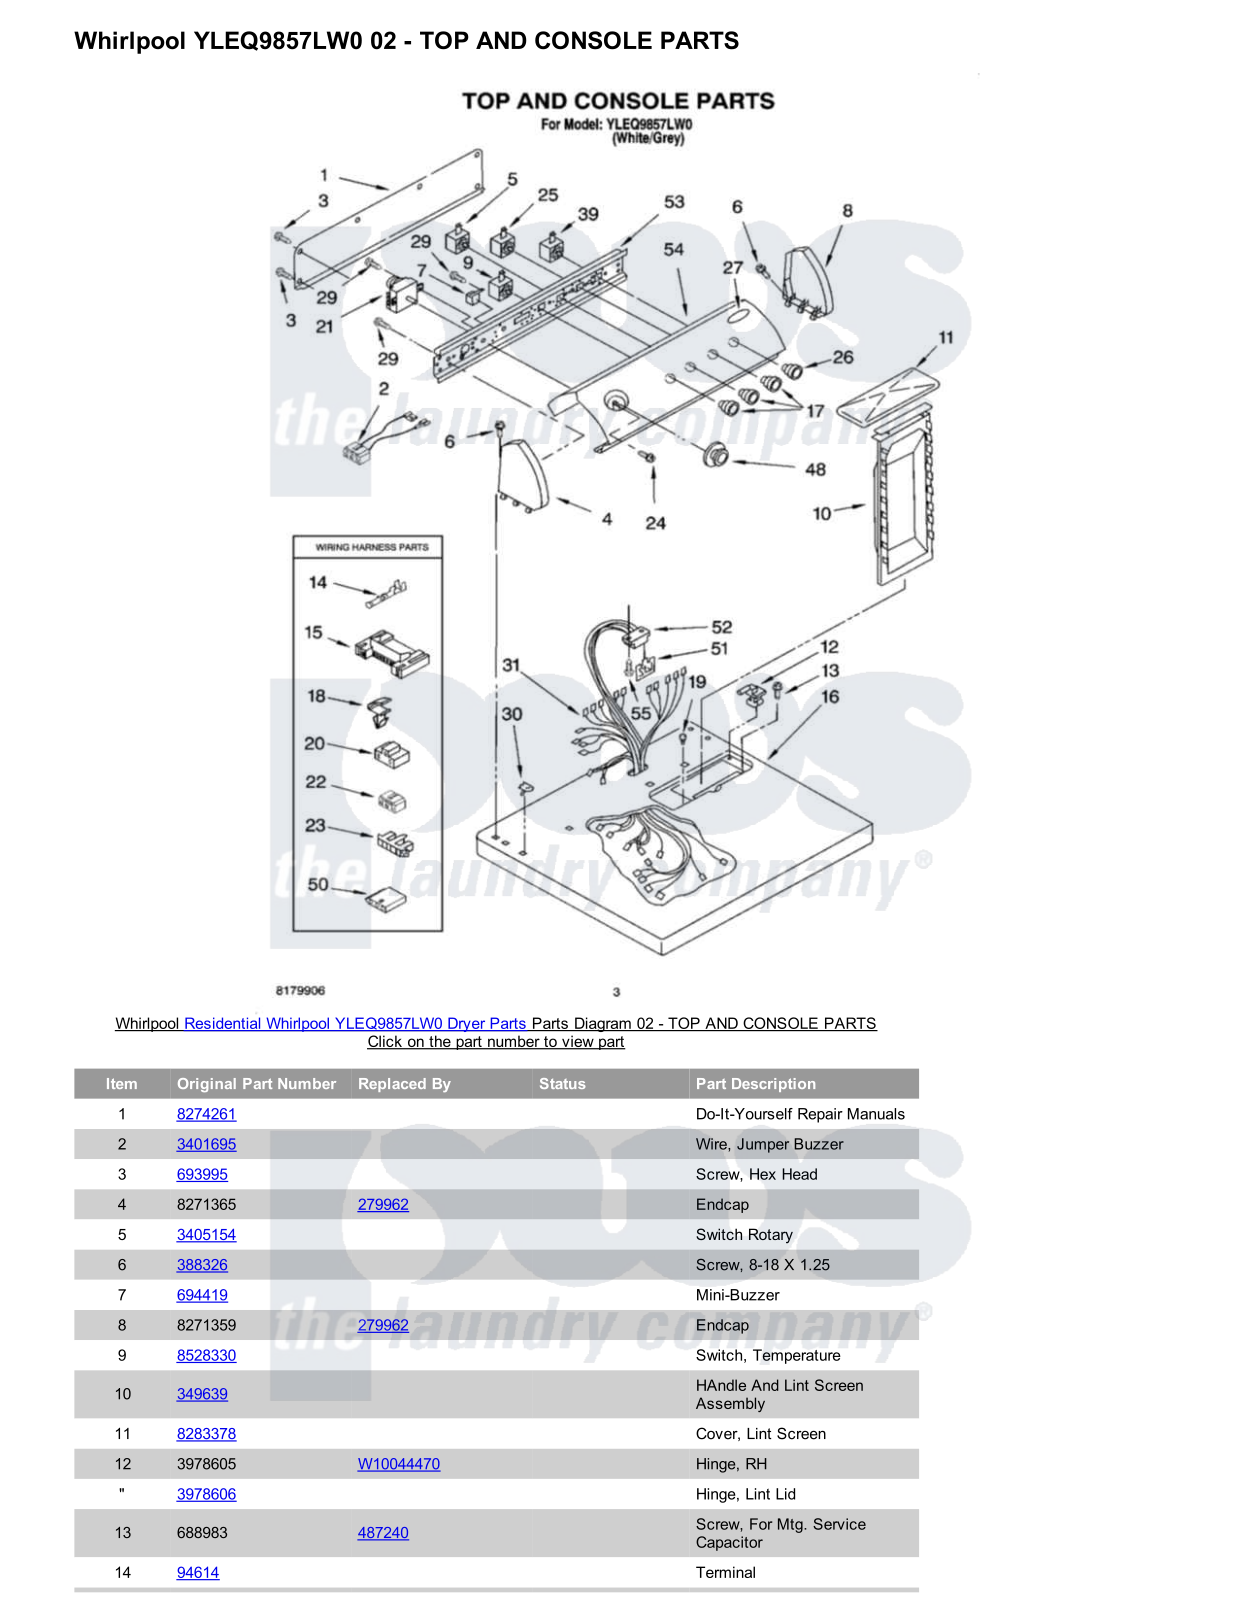 Whirlpool YLEQ9857LW0 Parts Diagram